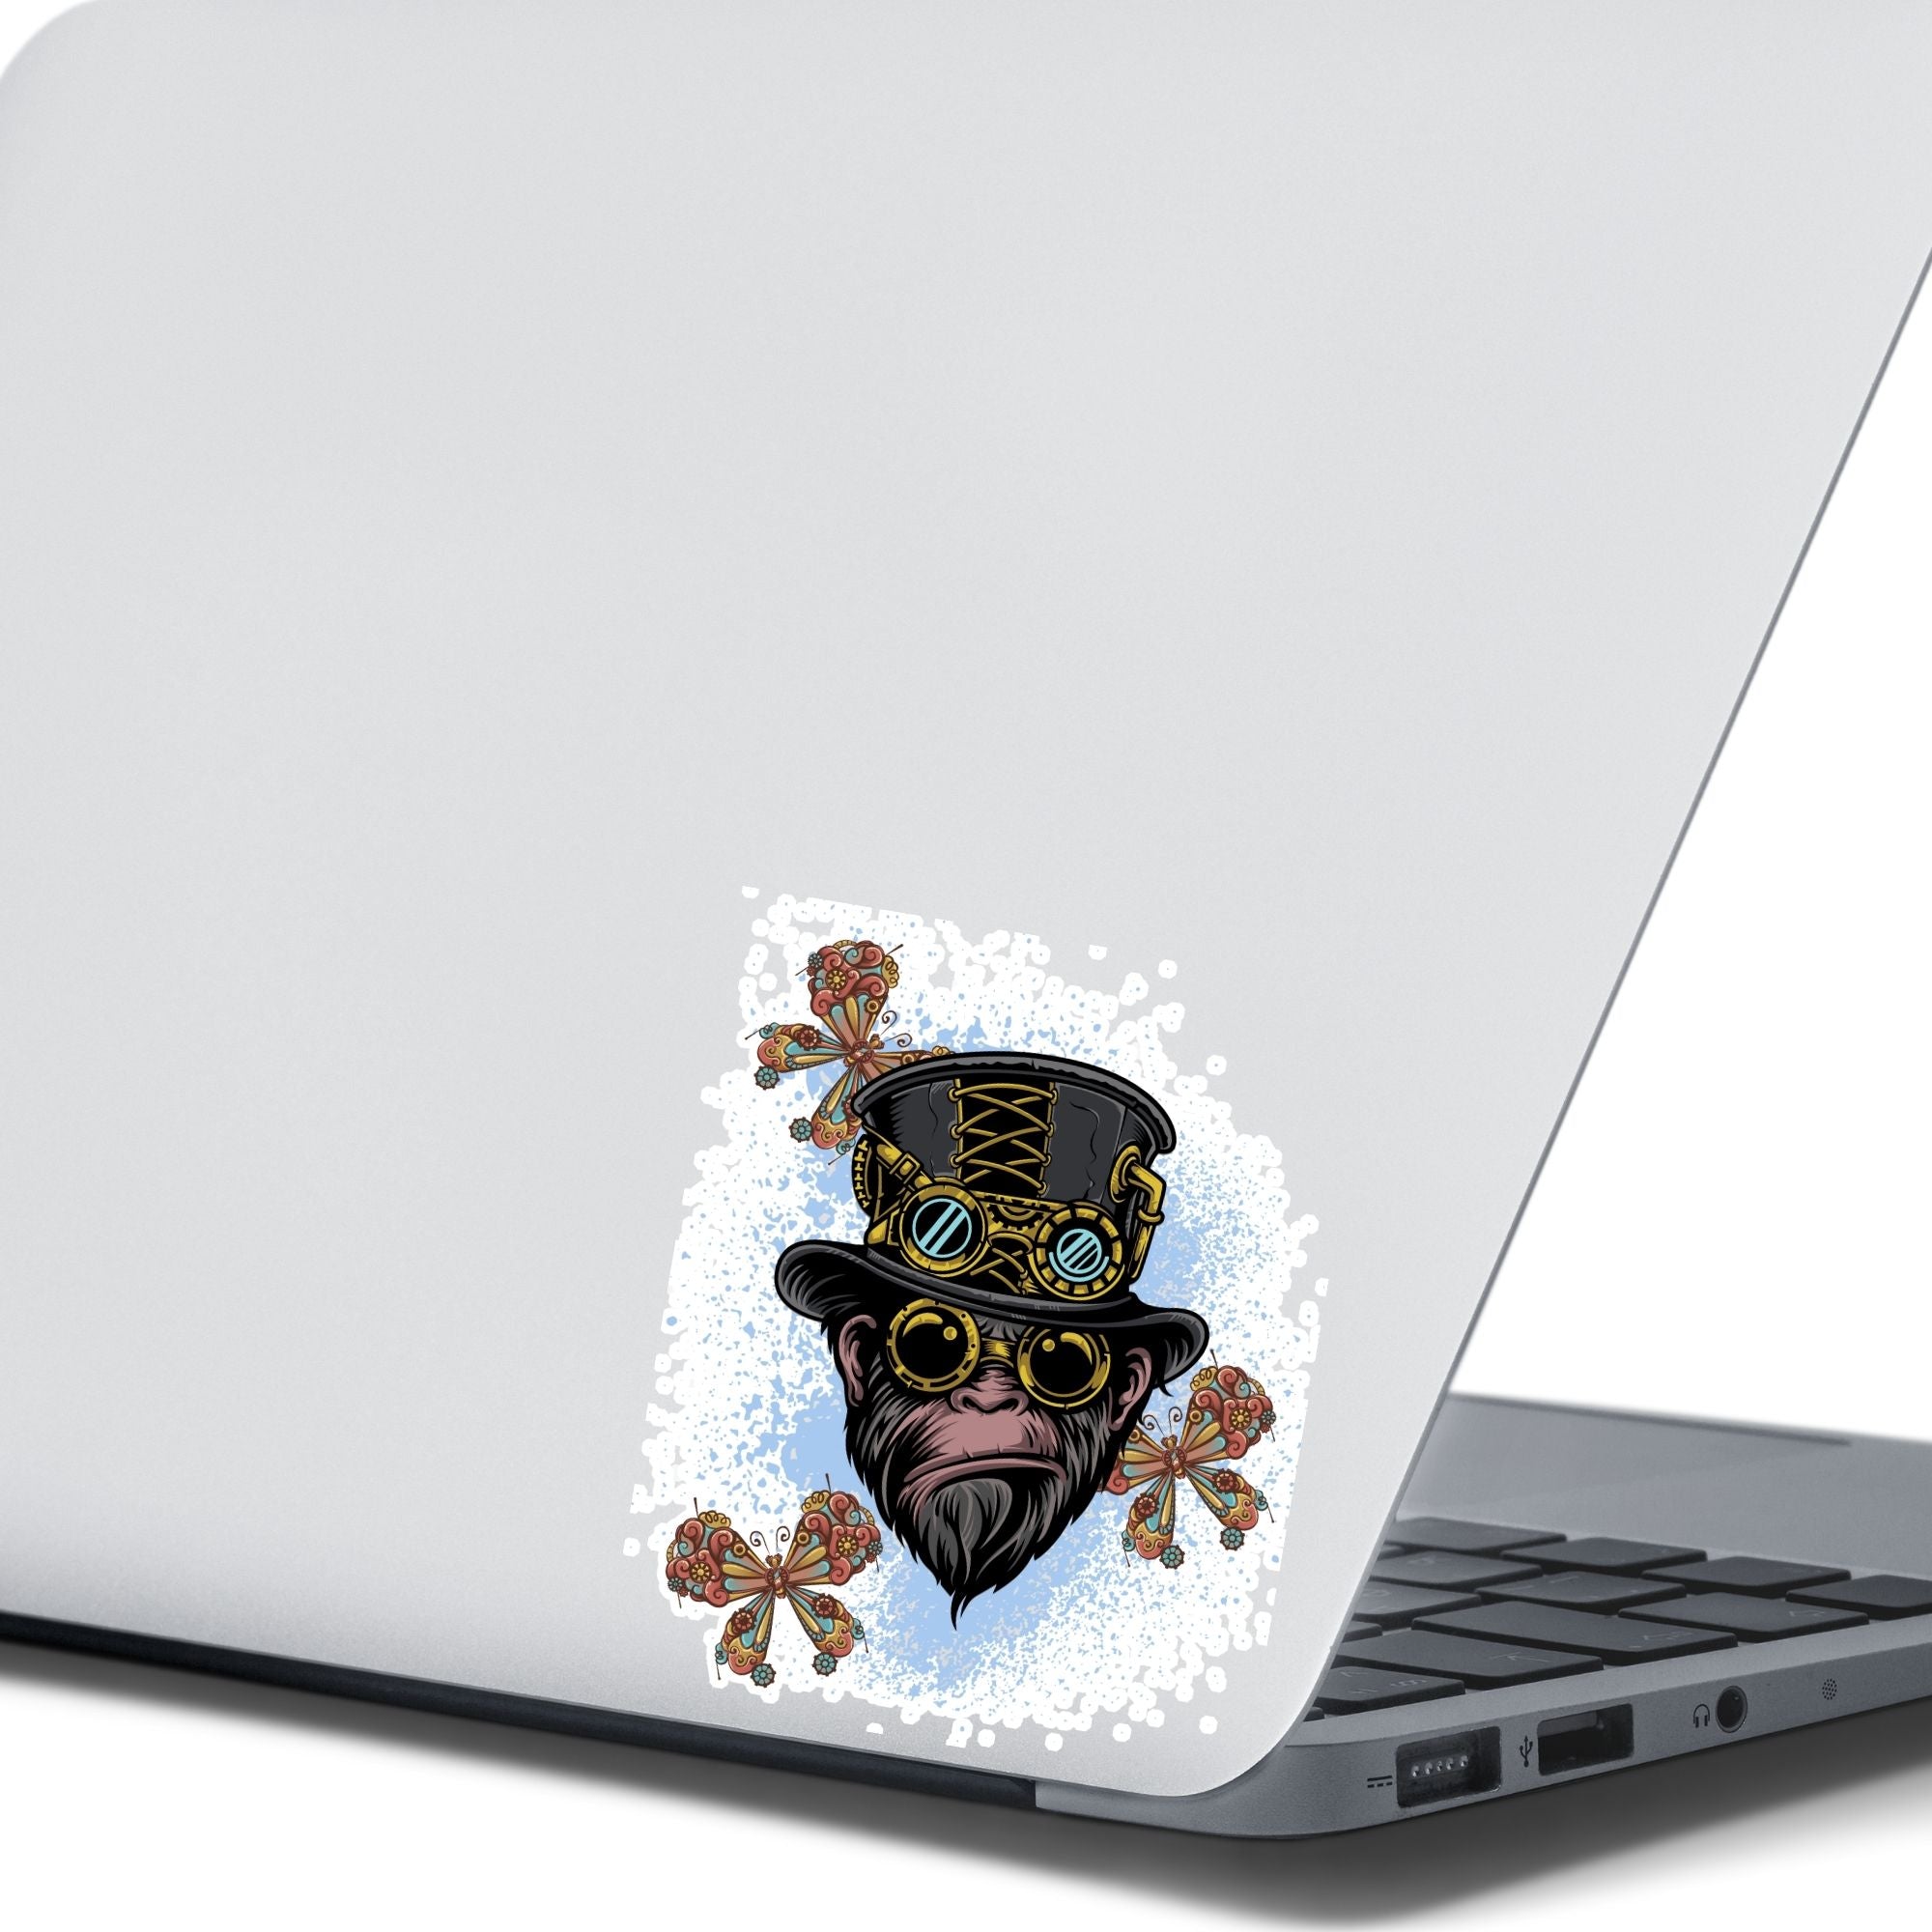 Steampunk Monkey has his own version of a steampunk hat and goggles, plus he is wearing goggles and surrounded by three steampunk butterflies. All on a blue and white background. This image shows the steampunk monkey sticker on the back of an open laptop.